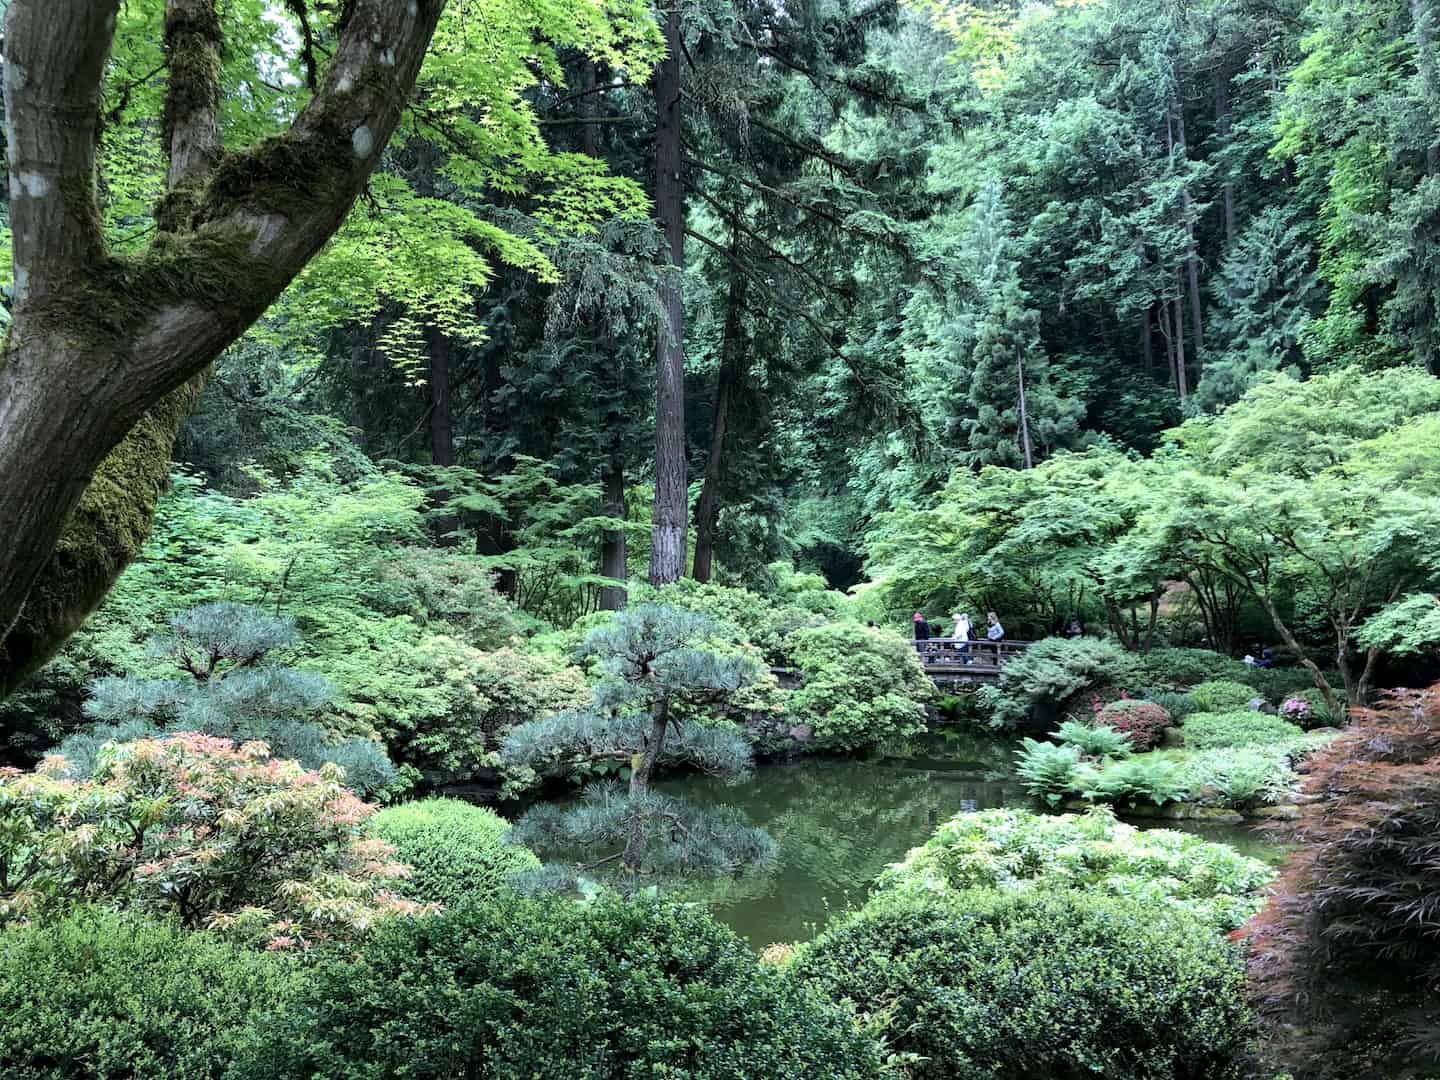 Planning a vacation in Portland, Oregon? The Portland Japanese Garden is a gorgeous way to explore the city. Here's everything you need to know. To & Fro Fam